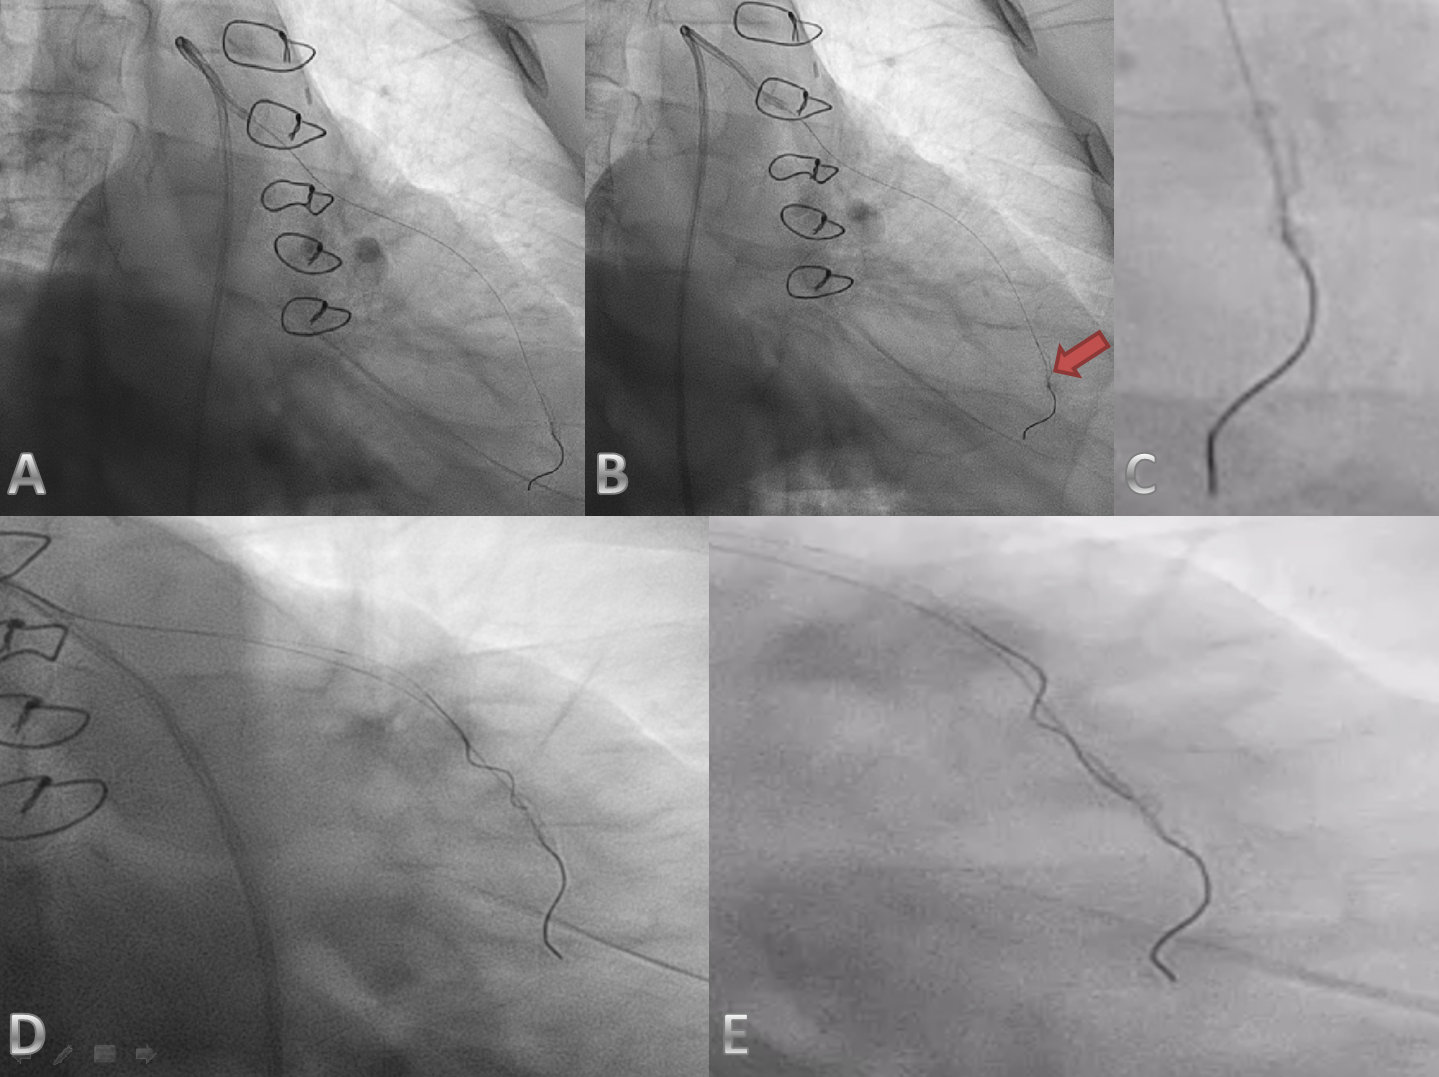 Figure 1. A: First image after transfer, B: Deformed stent view marked with red arrow, C: Zoomed image of deformed stent, D: Failure to send the second guide wire, E: Failure to send the second guide wire zoomed in